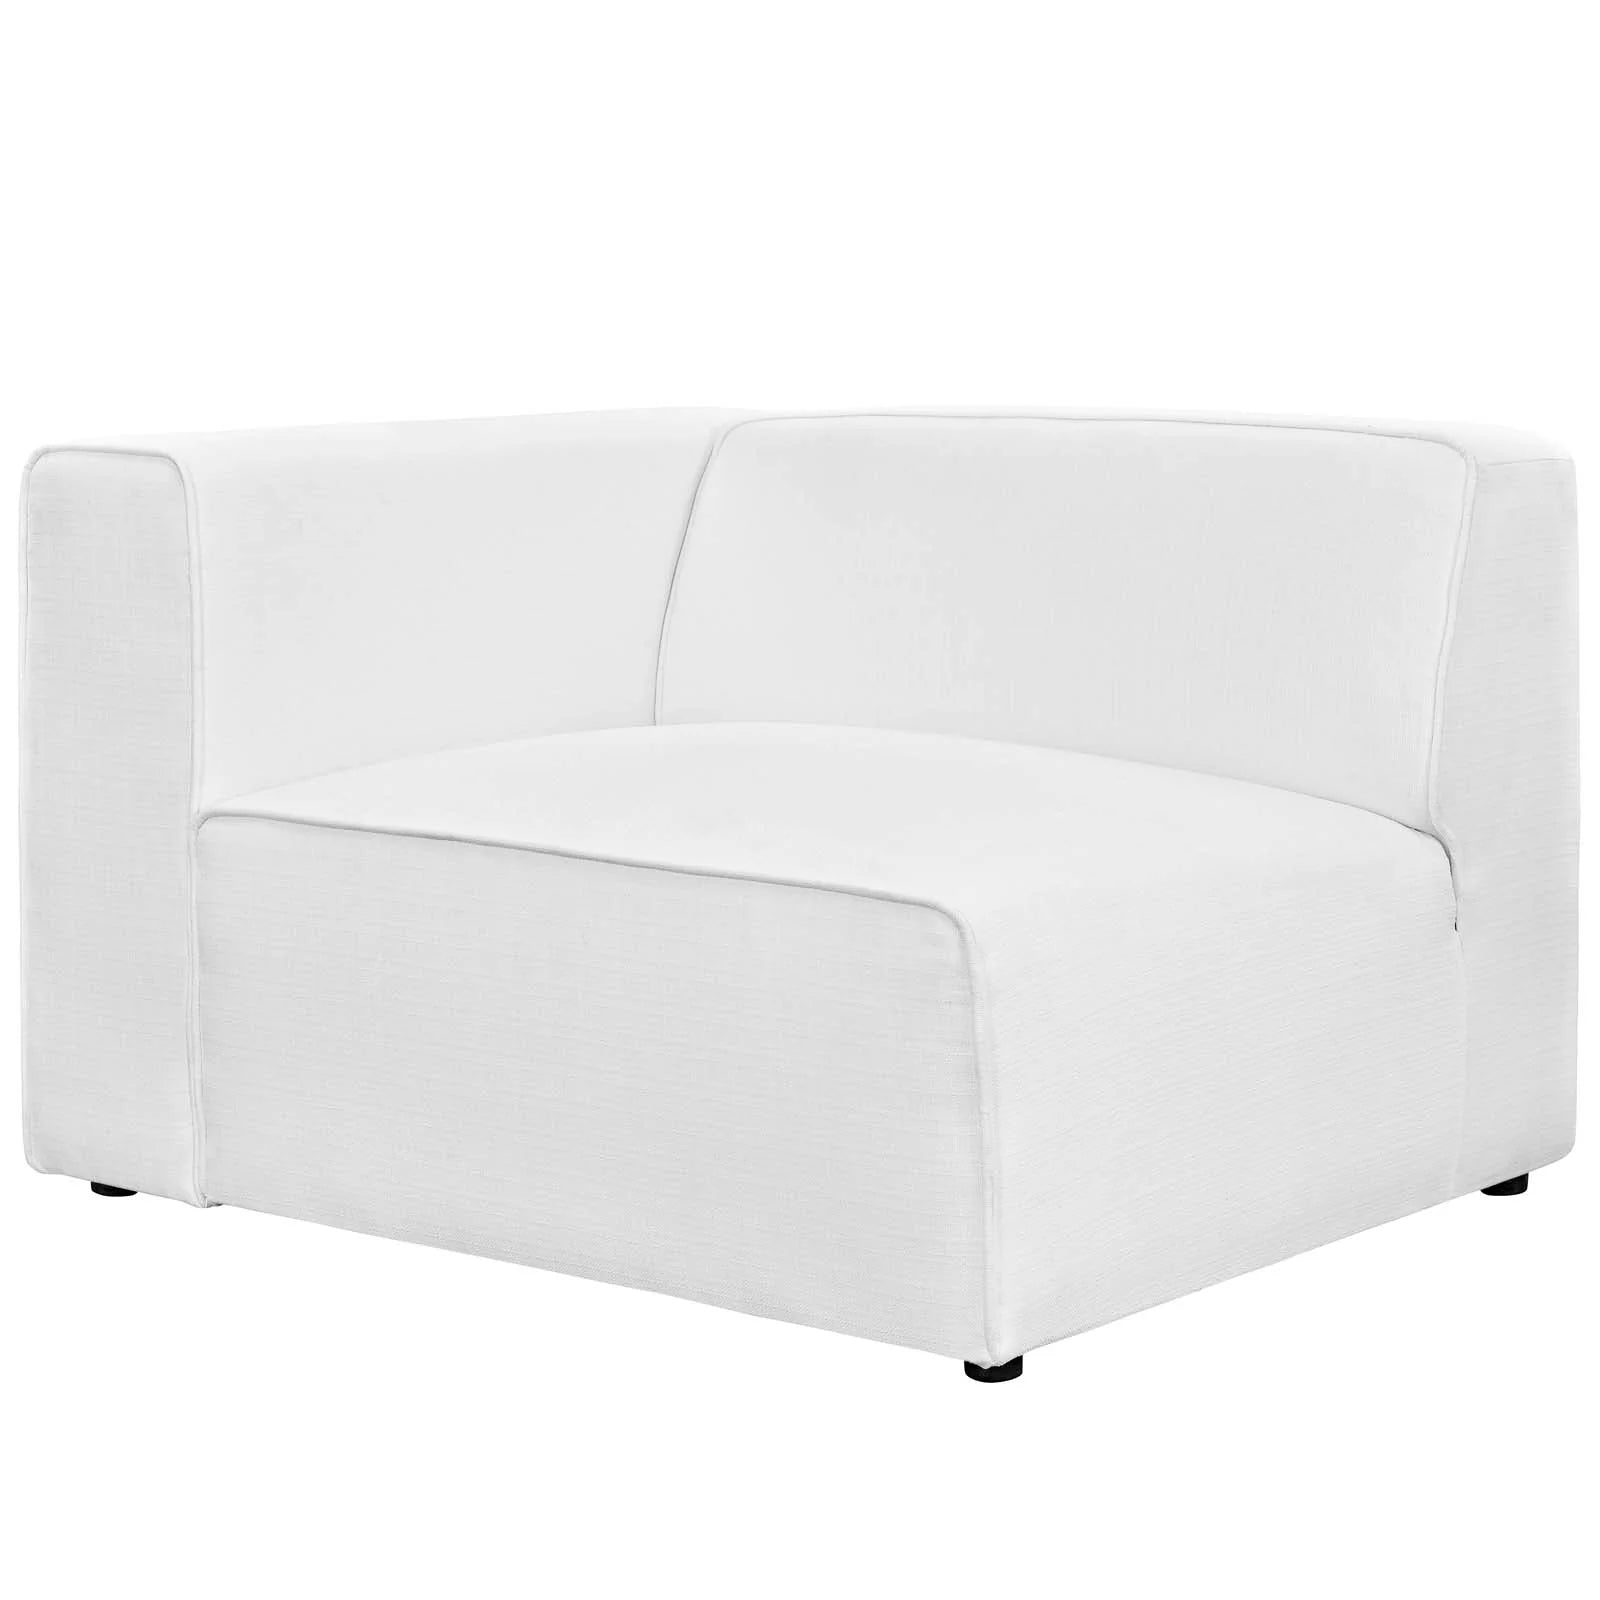 Venice 5 Piece Extended Sectional